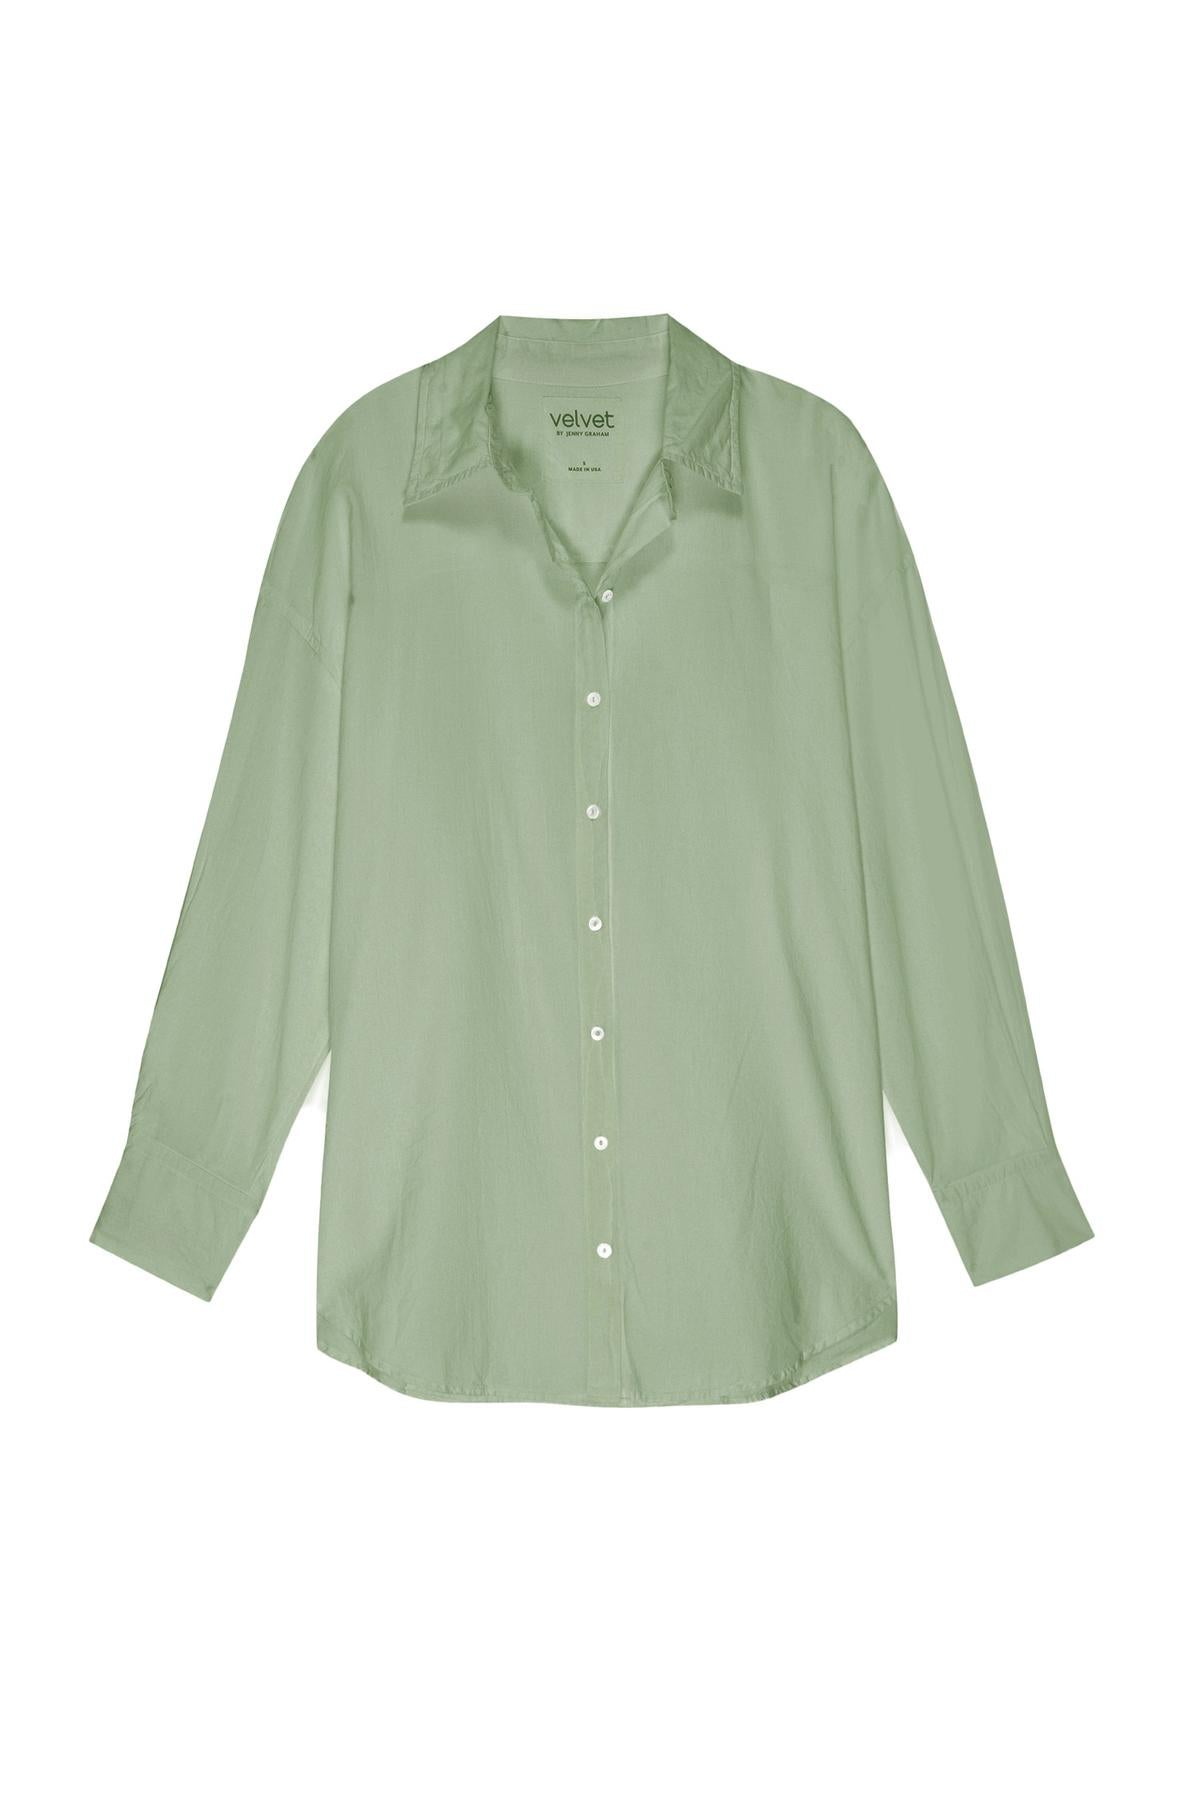 An oversized women's Redondo Button-Up Shirt in sage green by Velvet by Jenny Graham.-36212516192449